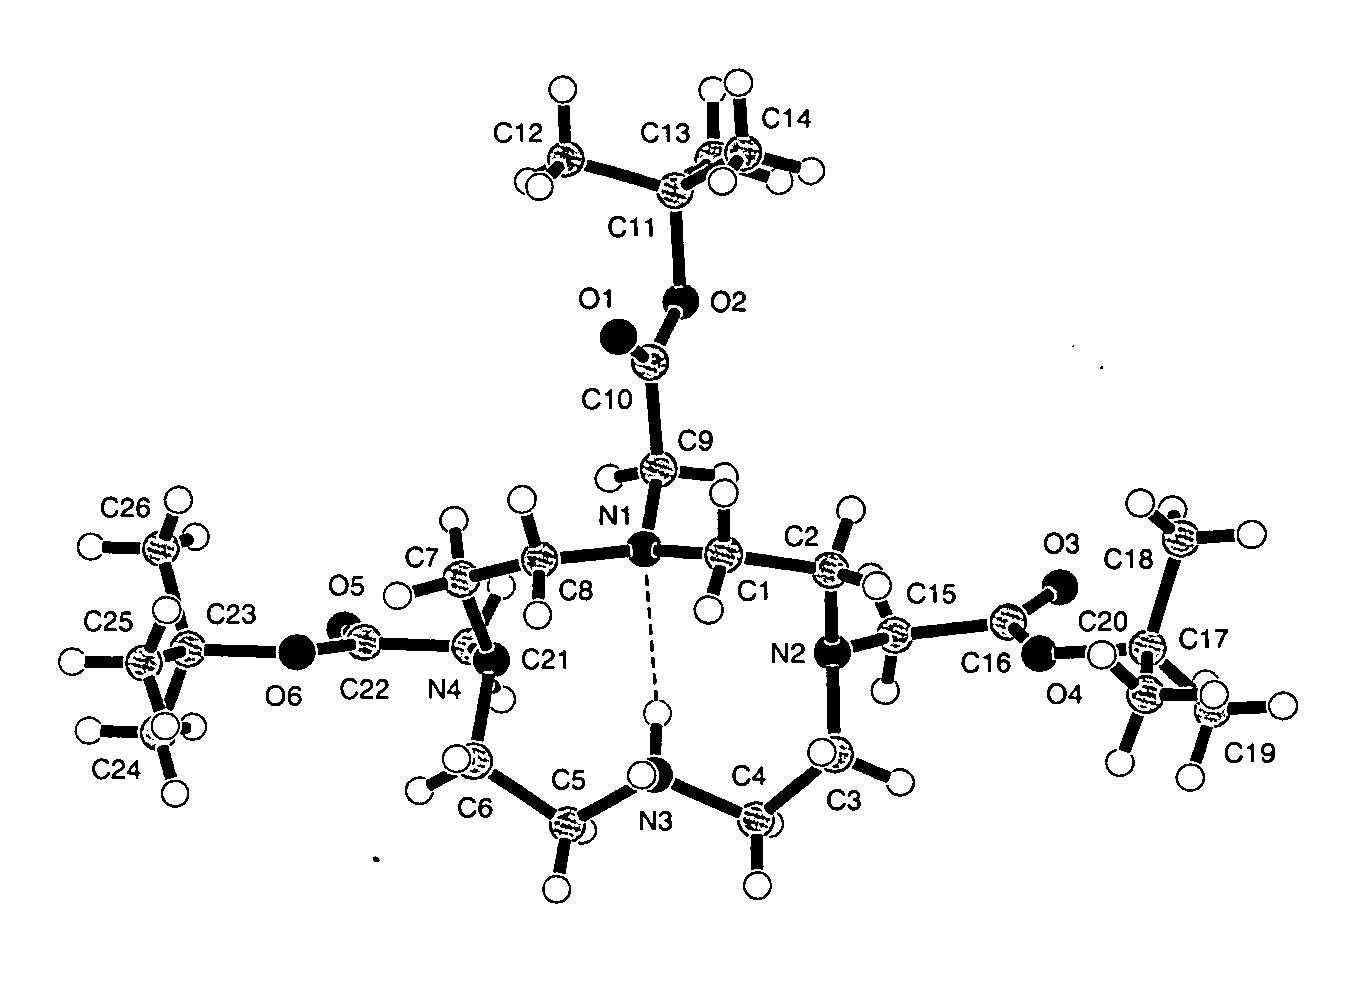 Synthesis of tris N-alkylated 1,4,7,10-tetraazacyclododecanes